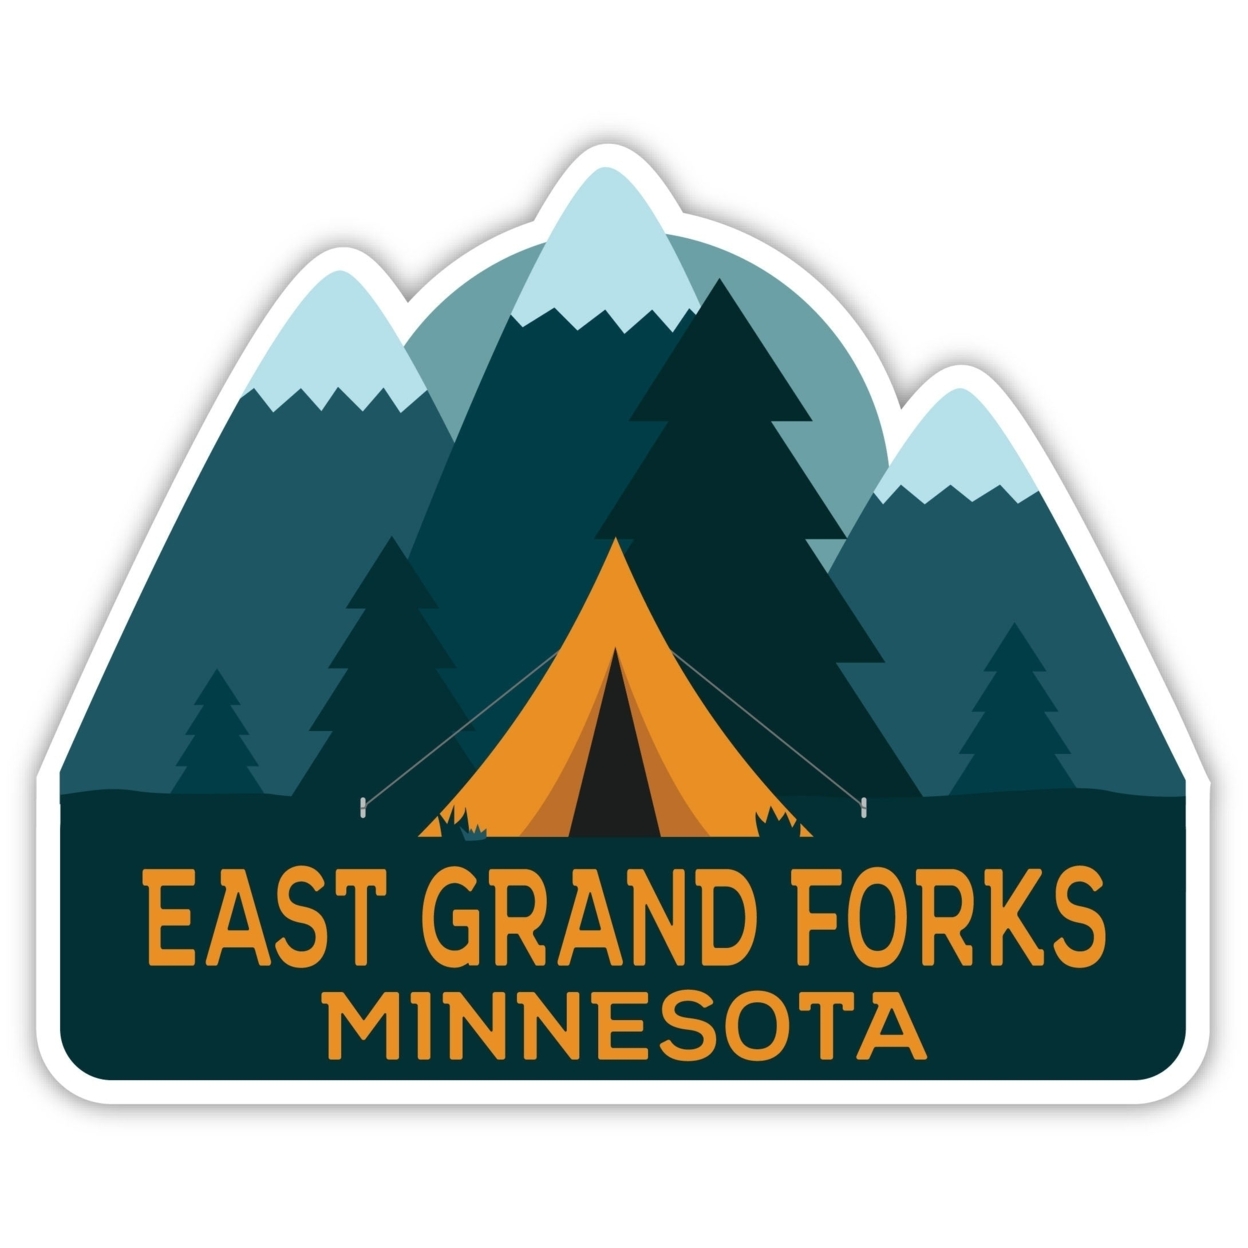 East Grand Forks Minnesota Souvenir Decorative Stickers (Choose Theme And Size) - 4-Pack, 4-Inch, Bear